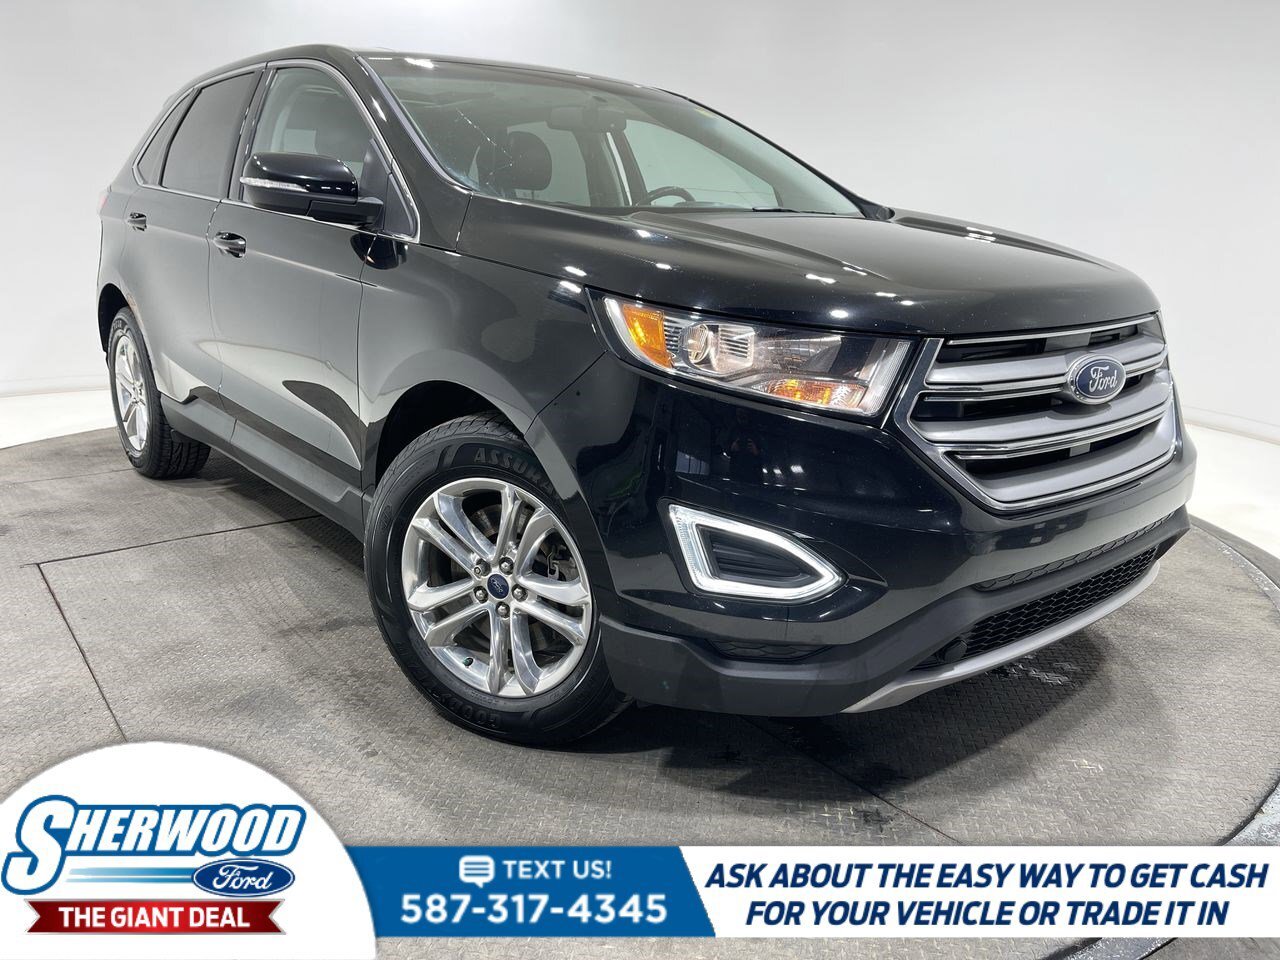 2016 Ford Edge SEL AWD- $0 Down $122 Weekly- MOONROOF- LEATHER